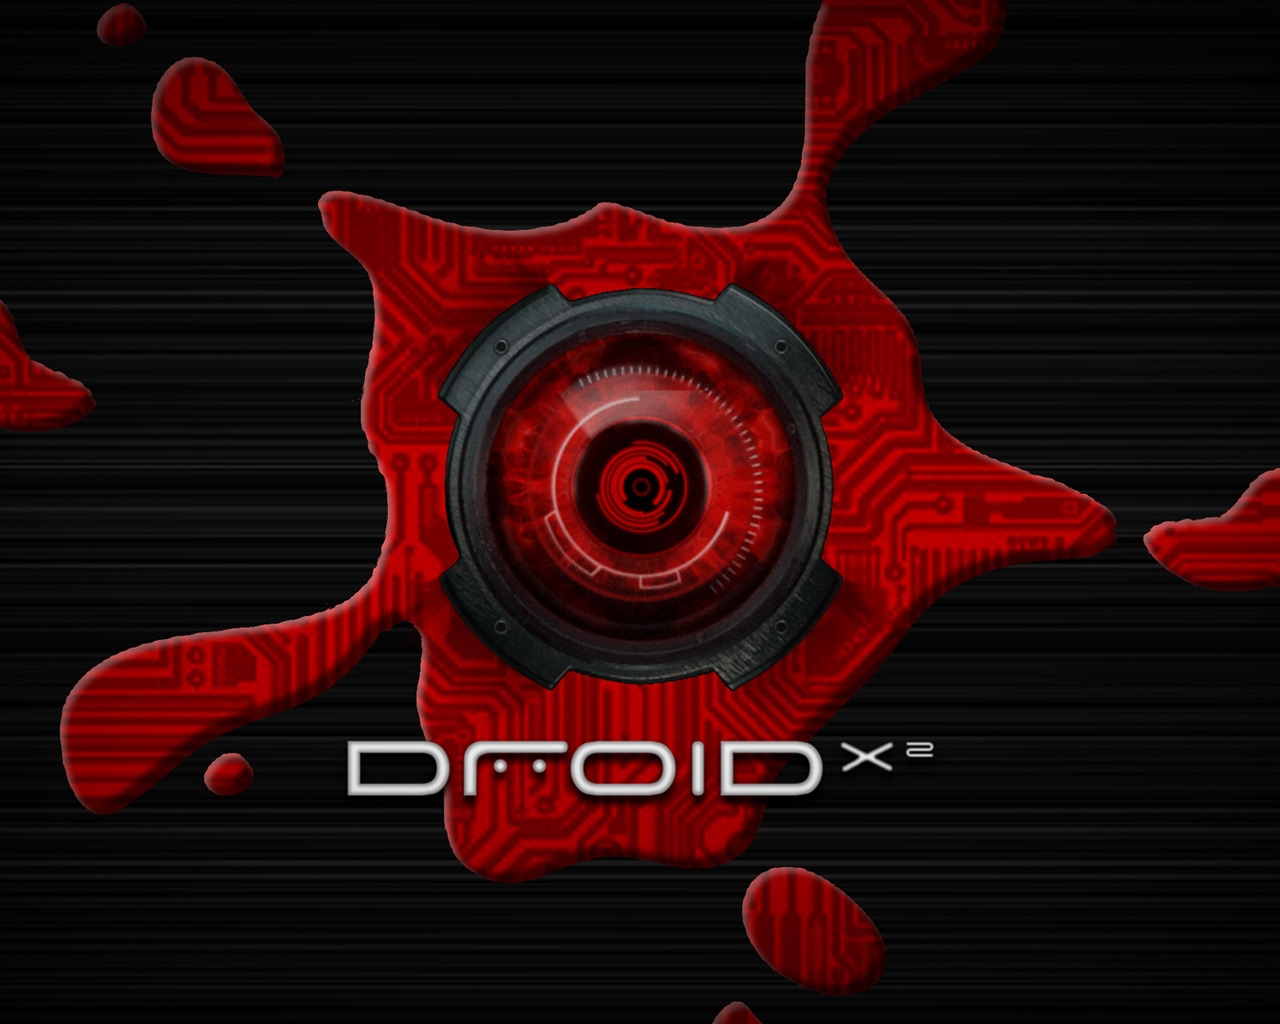 Droid X2 Splat for 1280 x 1024 resolution